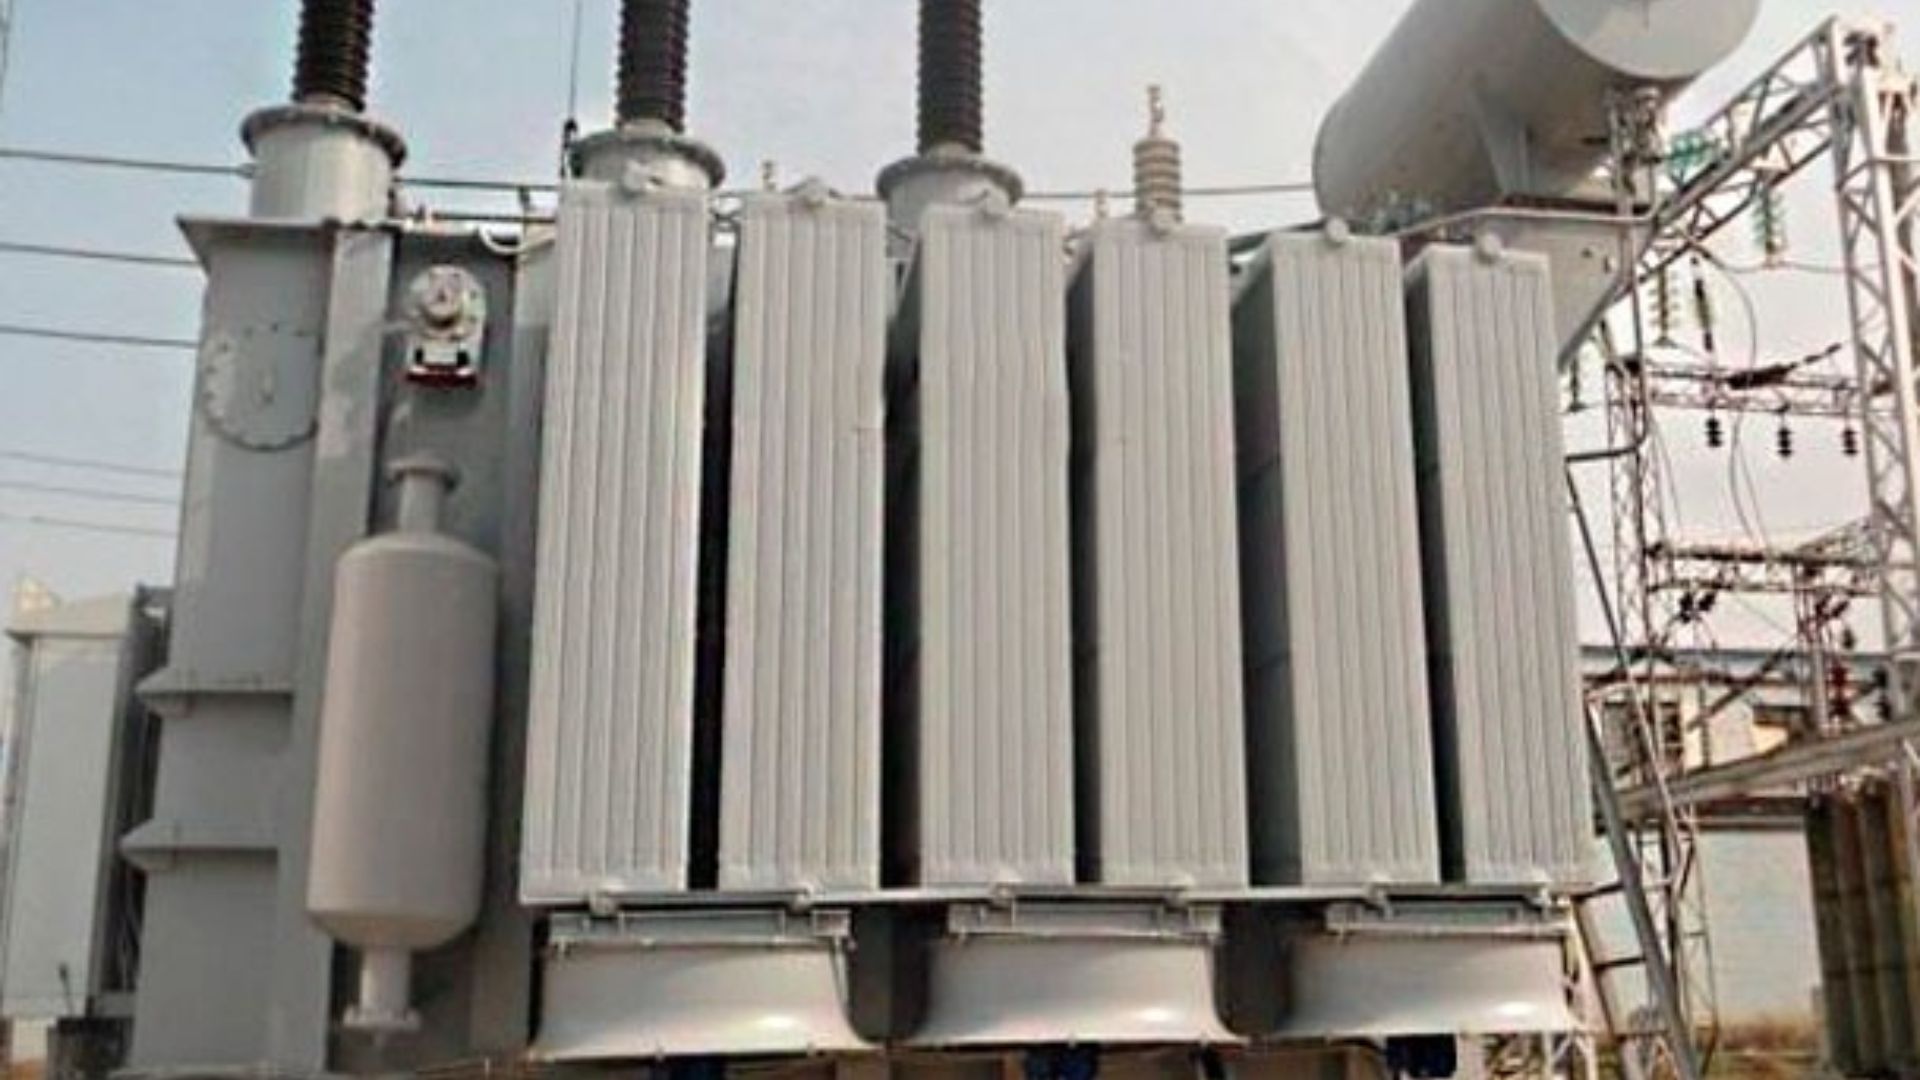 How to Evaluate and Select Transformer Suppliers